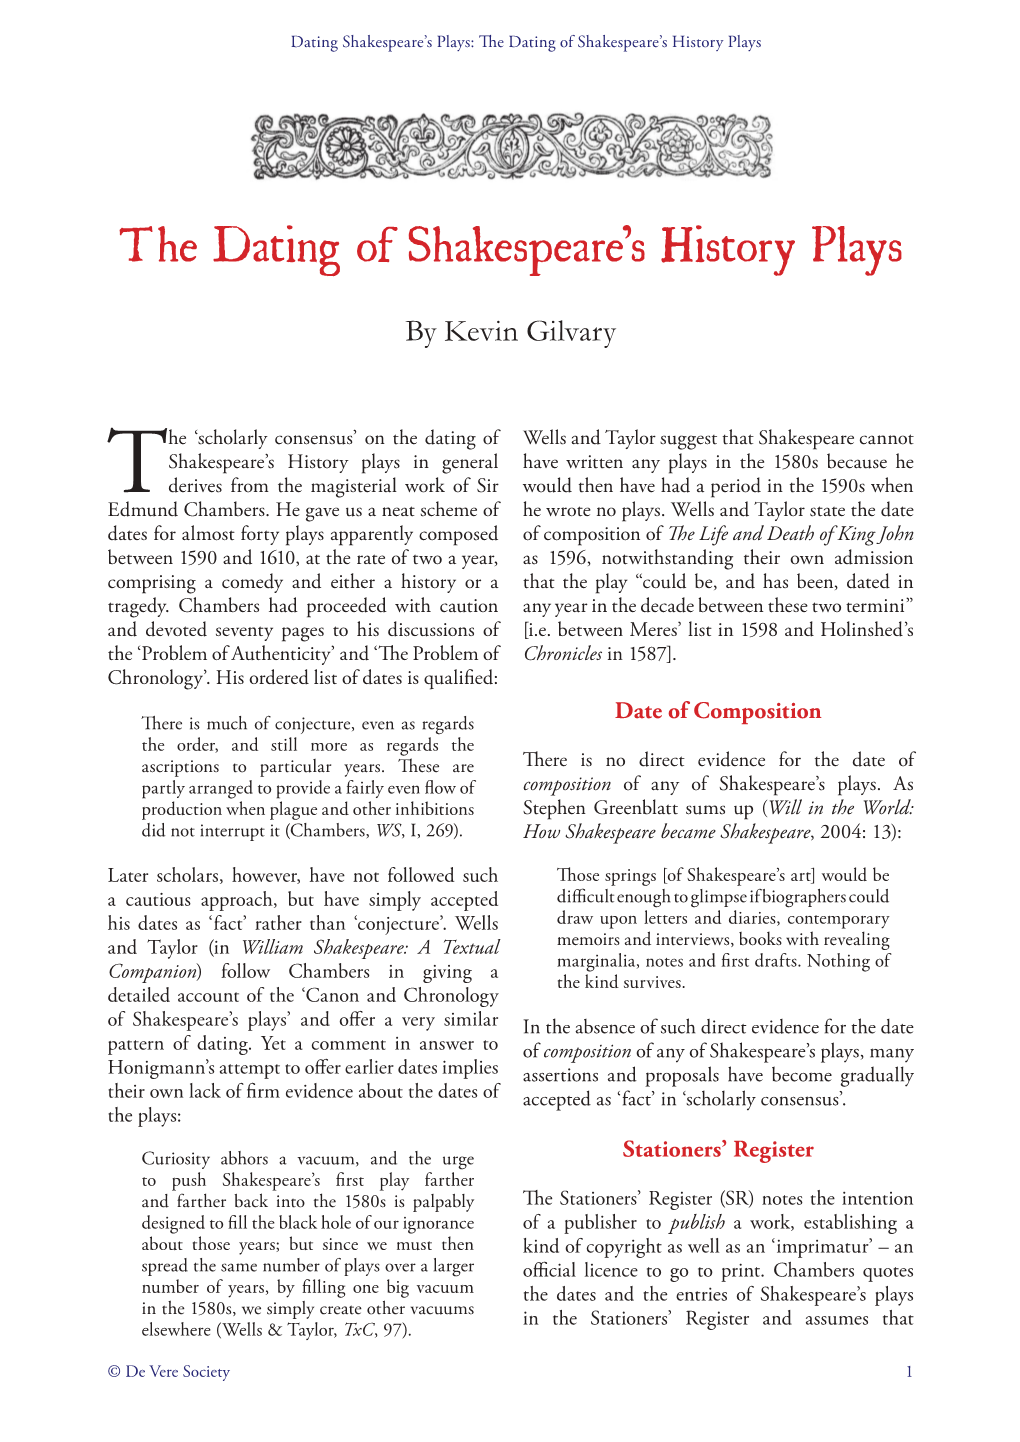 The Dating of Shakespeare's History Plays